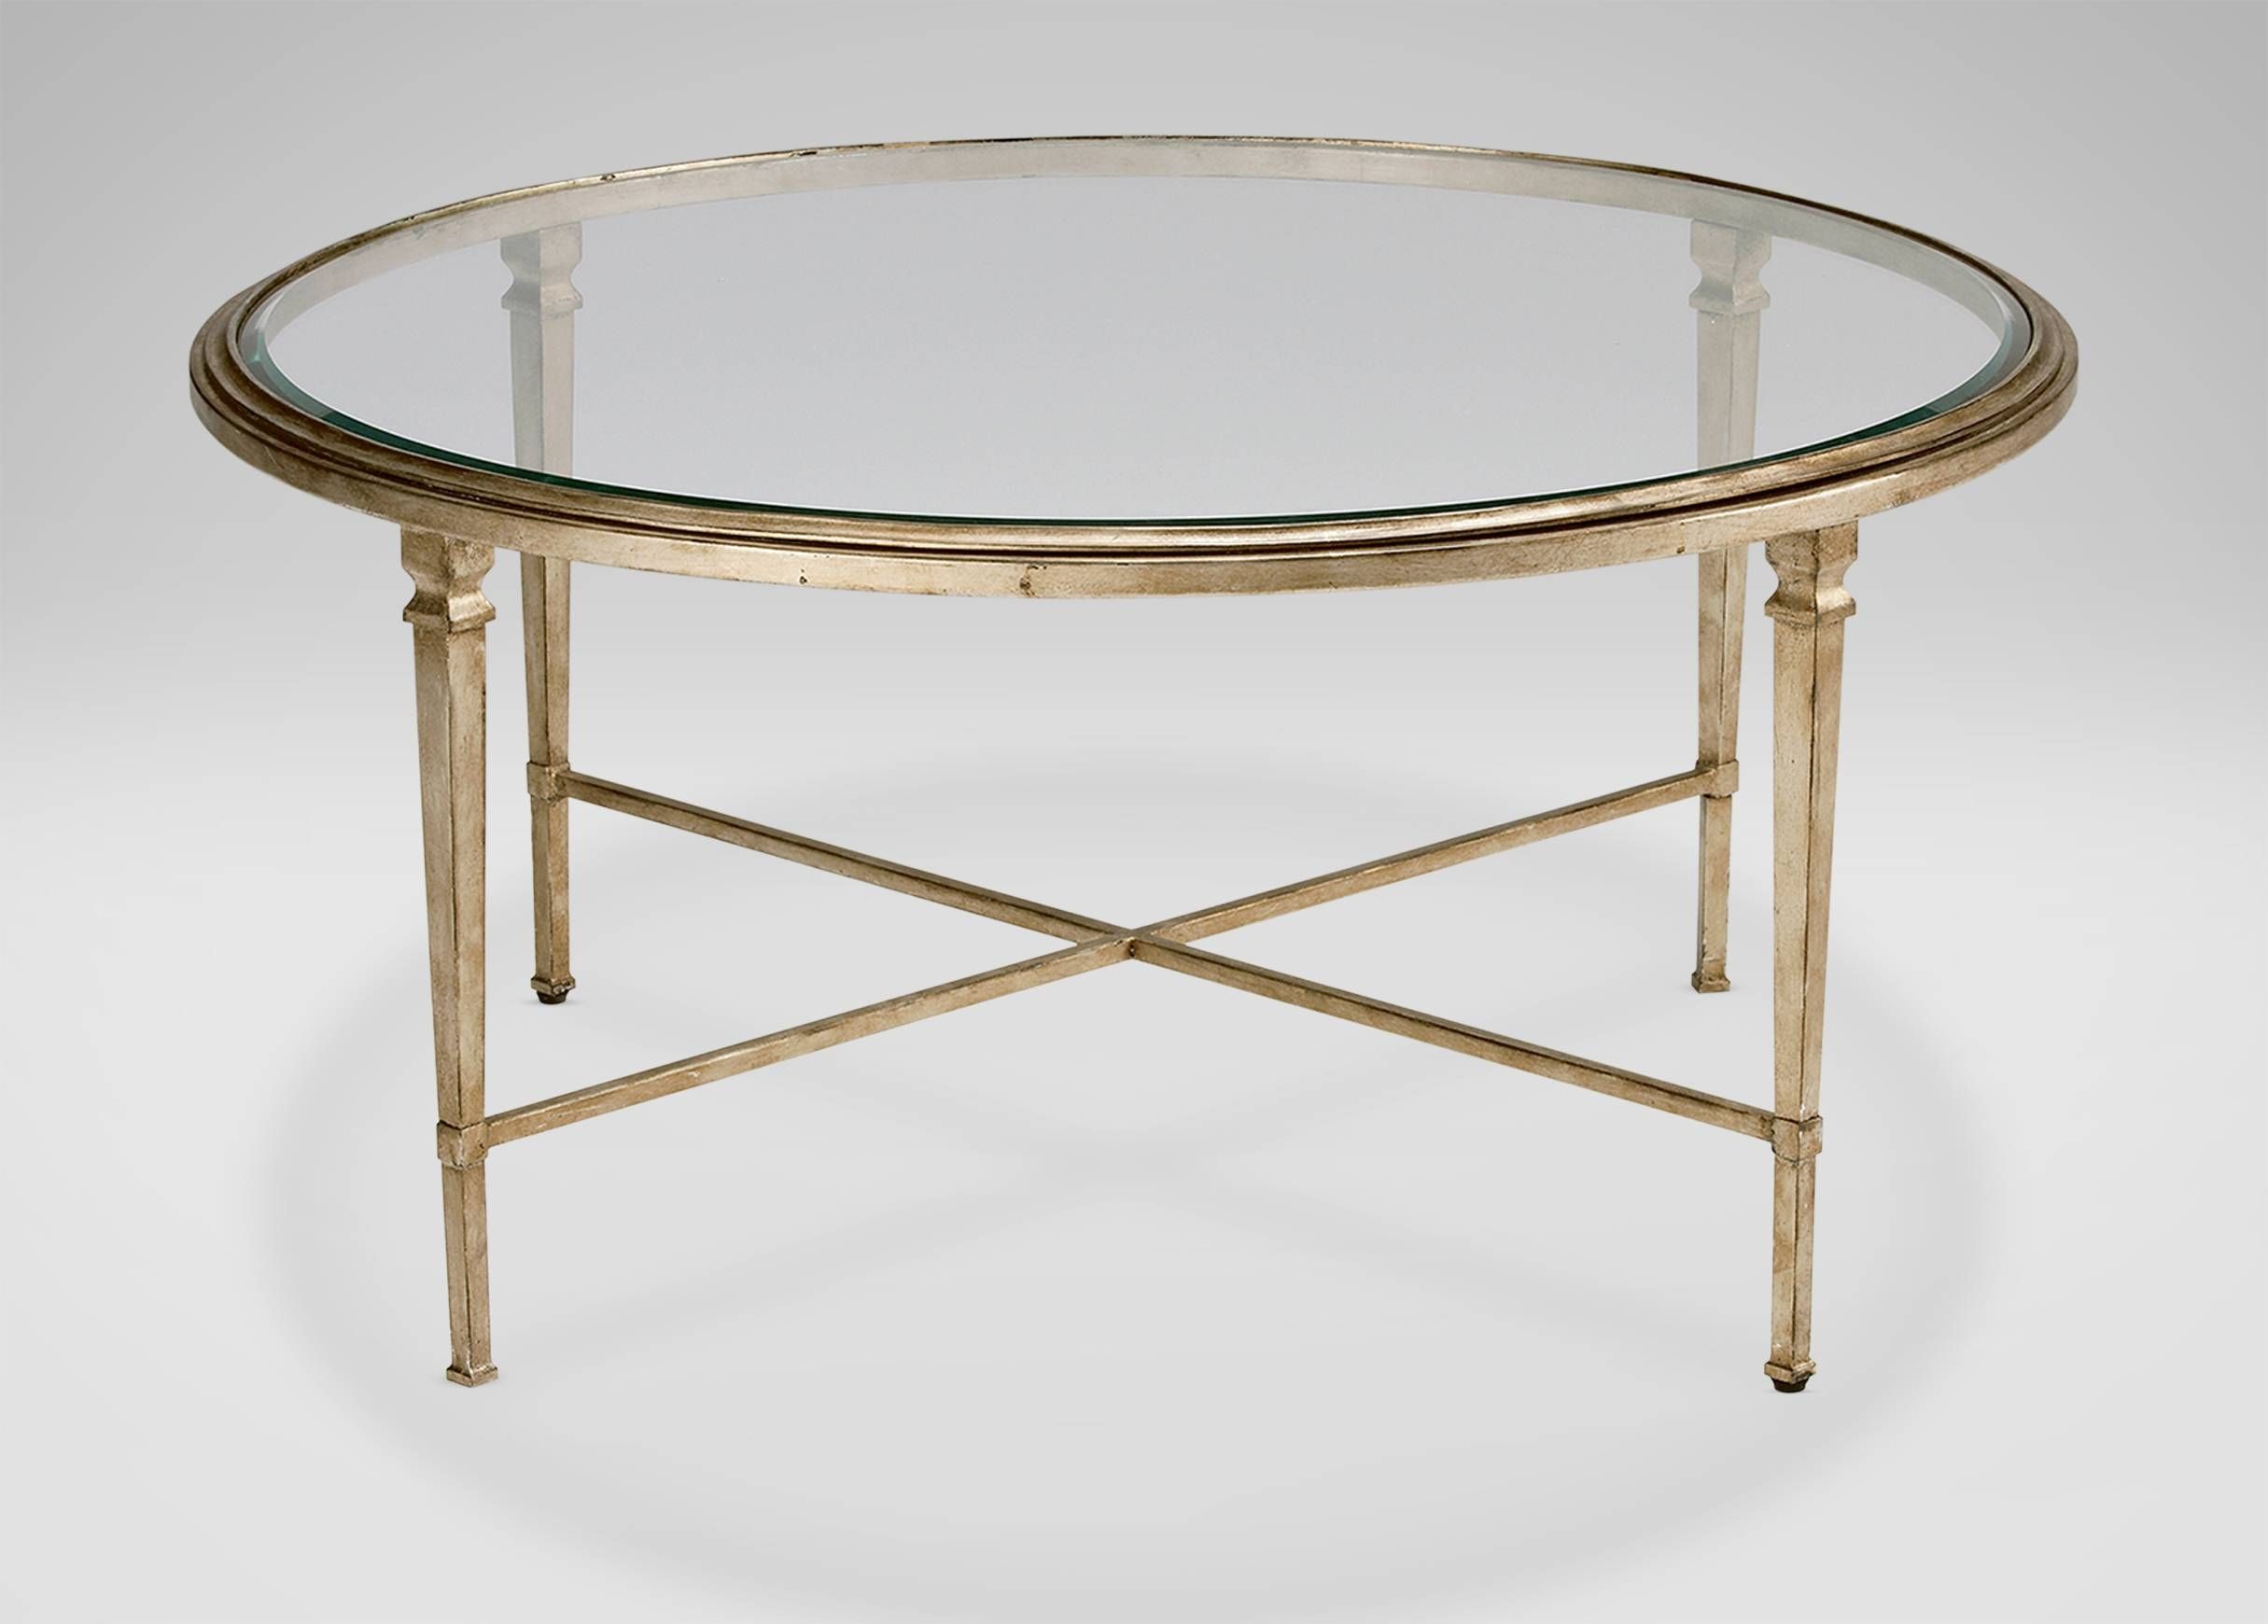 30 Inch Round Glass Top Coffee Table | Coffee Tables Decoration Intended For Circular Glass Coffee Tables (View 29 of 30)